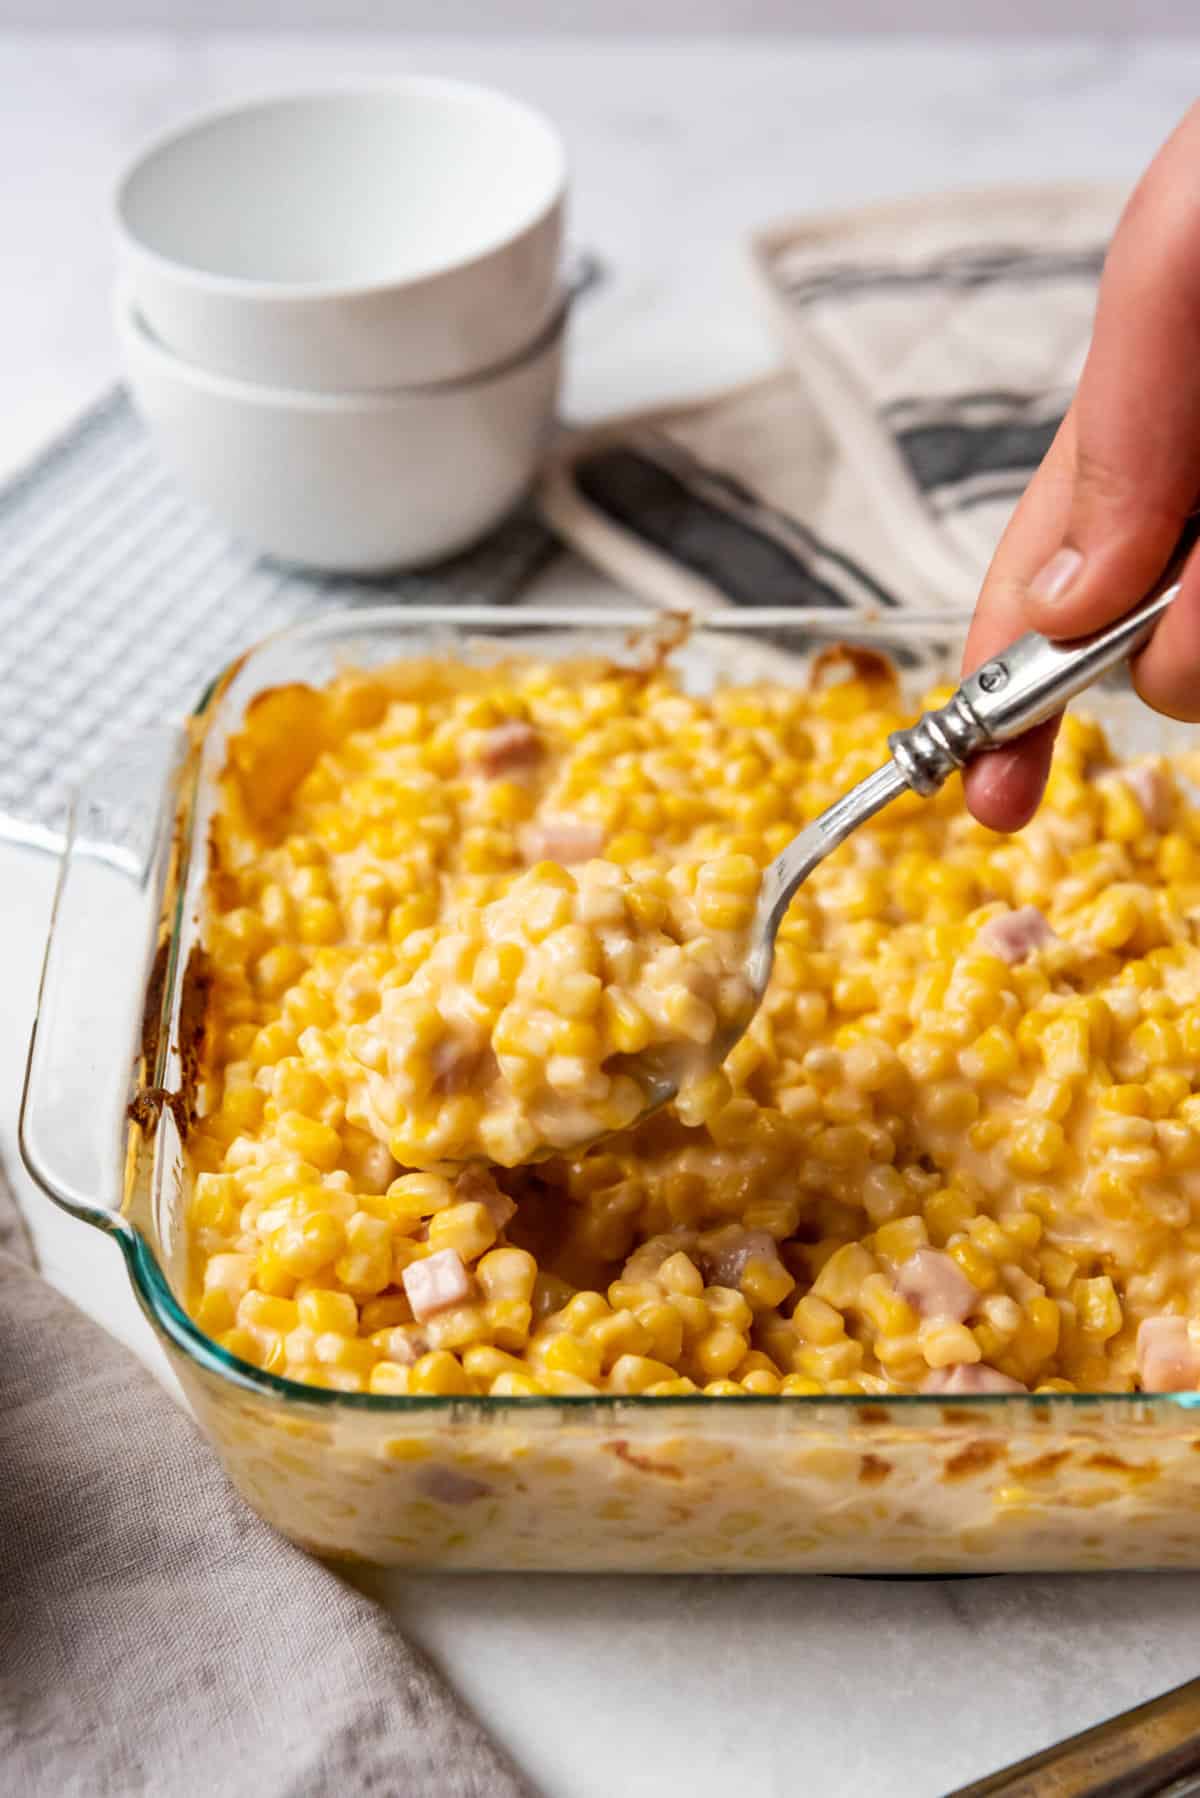 A hand lifting a spoonful of cheesy corn from a baking dish.